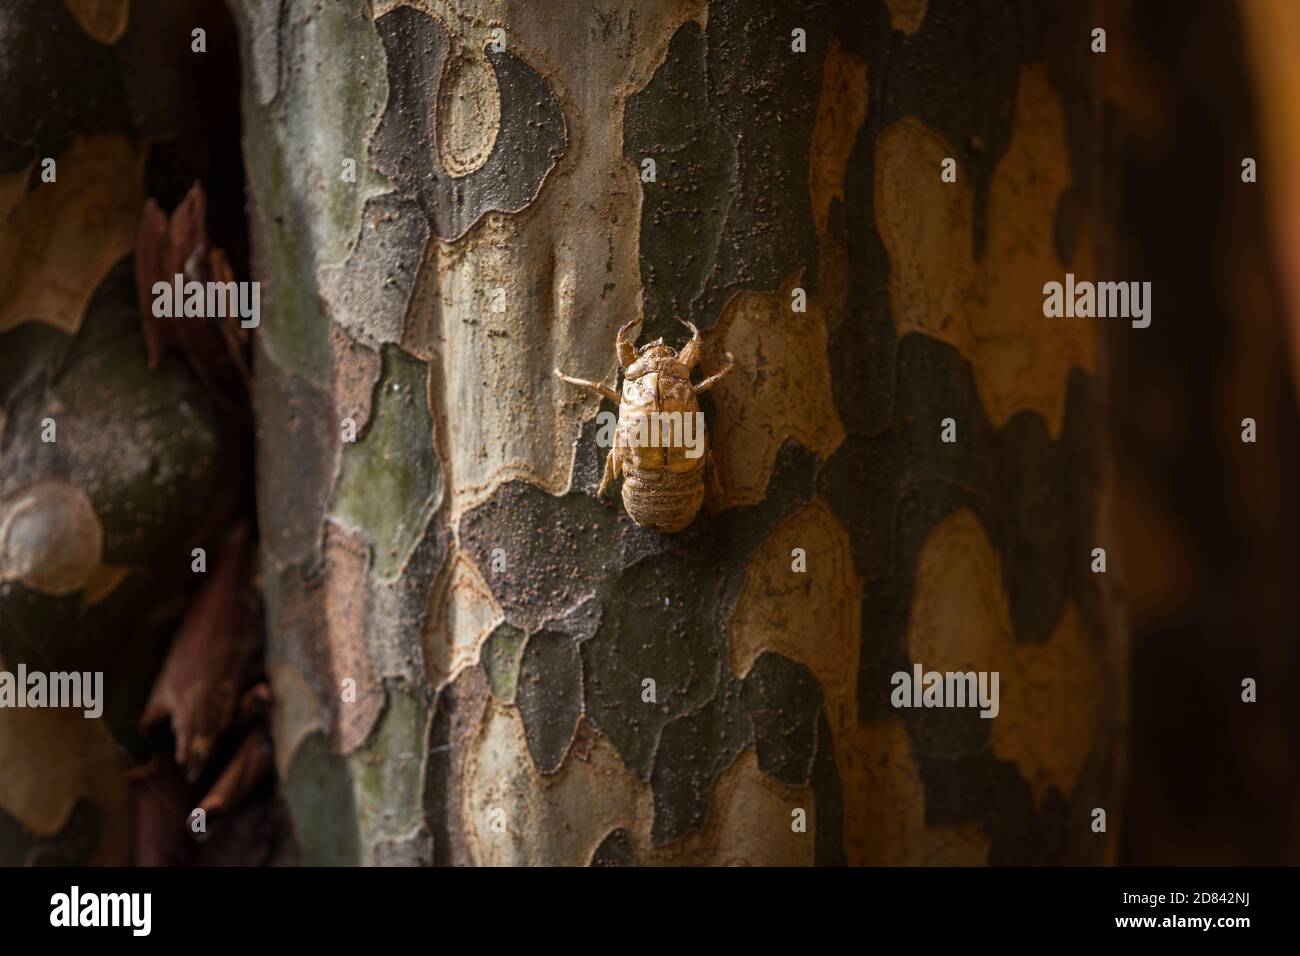 Insect molting cicada on a tree in nature Stock Photo